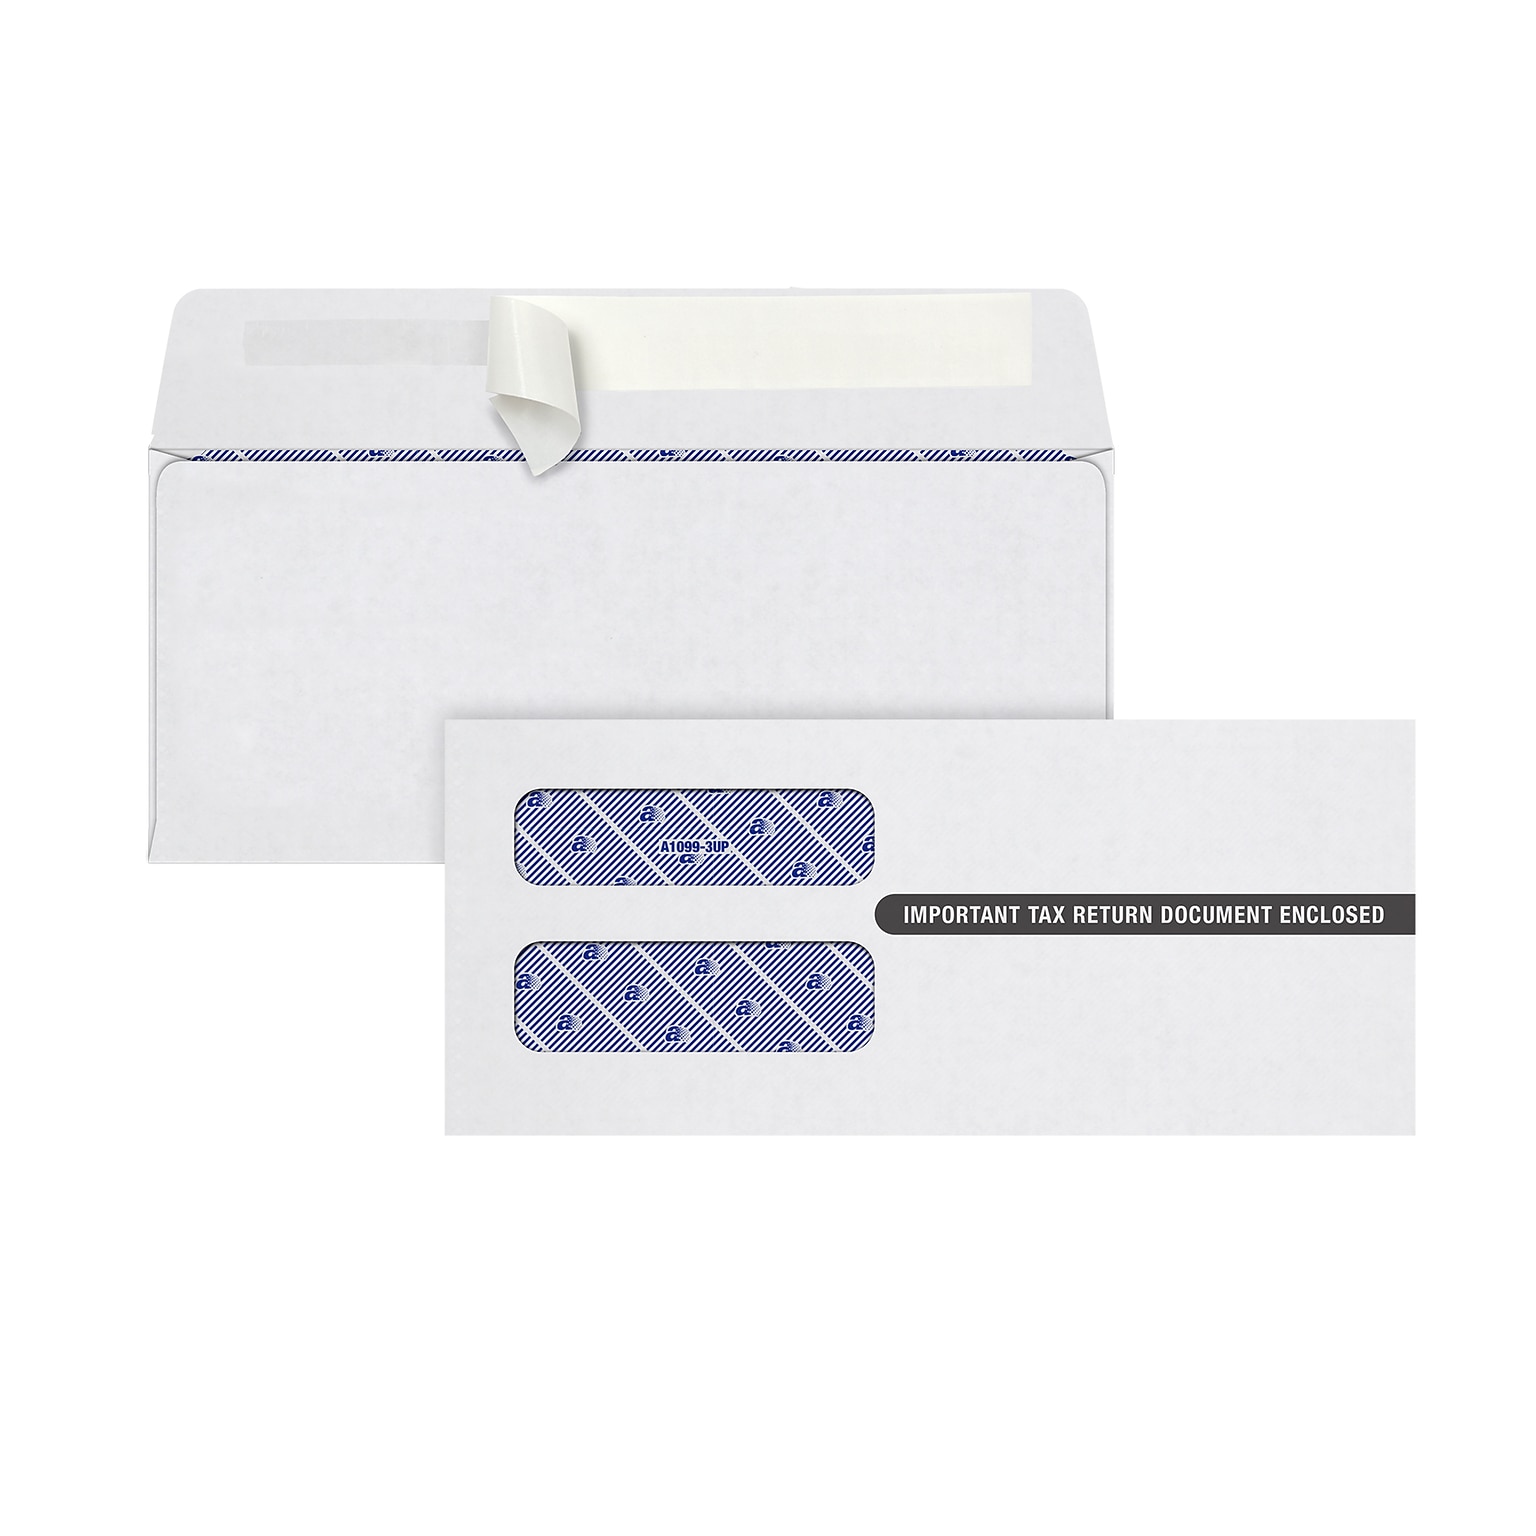 TOPS Self Seal Security Tinted Double Window Envelope, 3.75 x 8.5, White, 100/Pack (S1099-3PS)